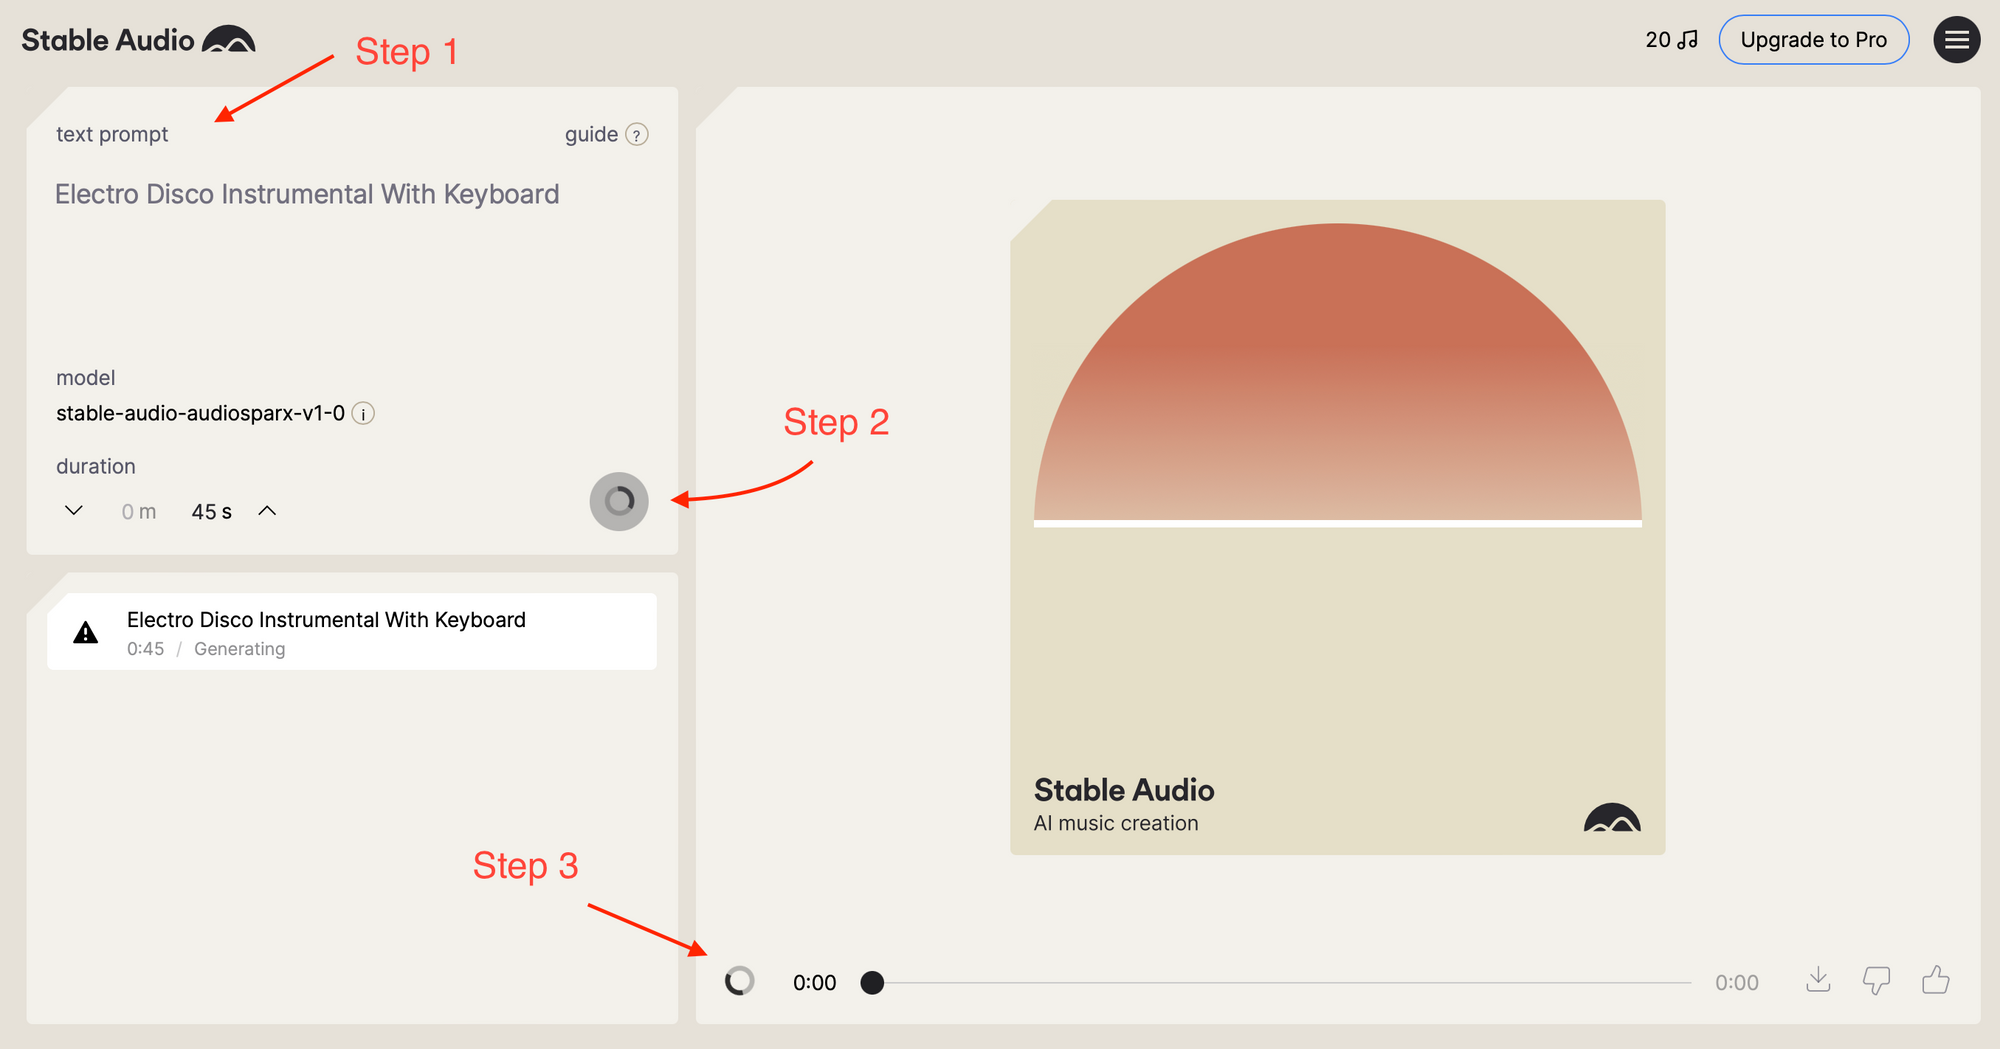 Stable Audio User Interface: Converting text to music